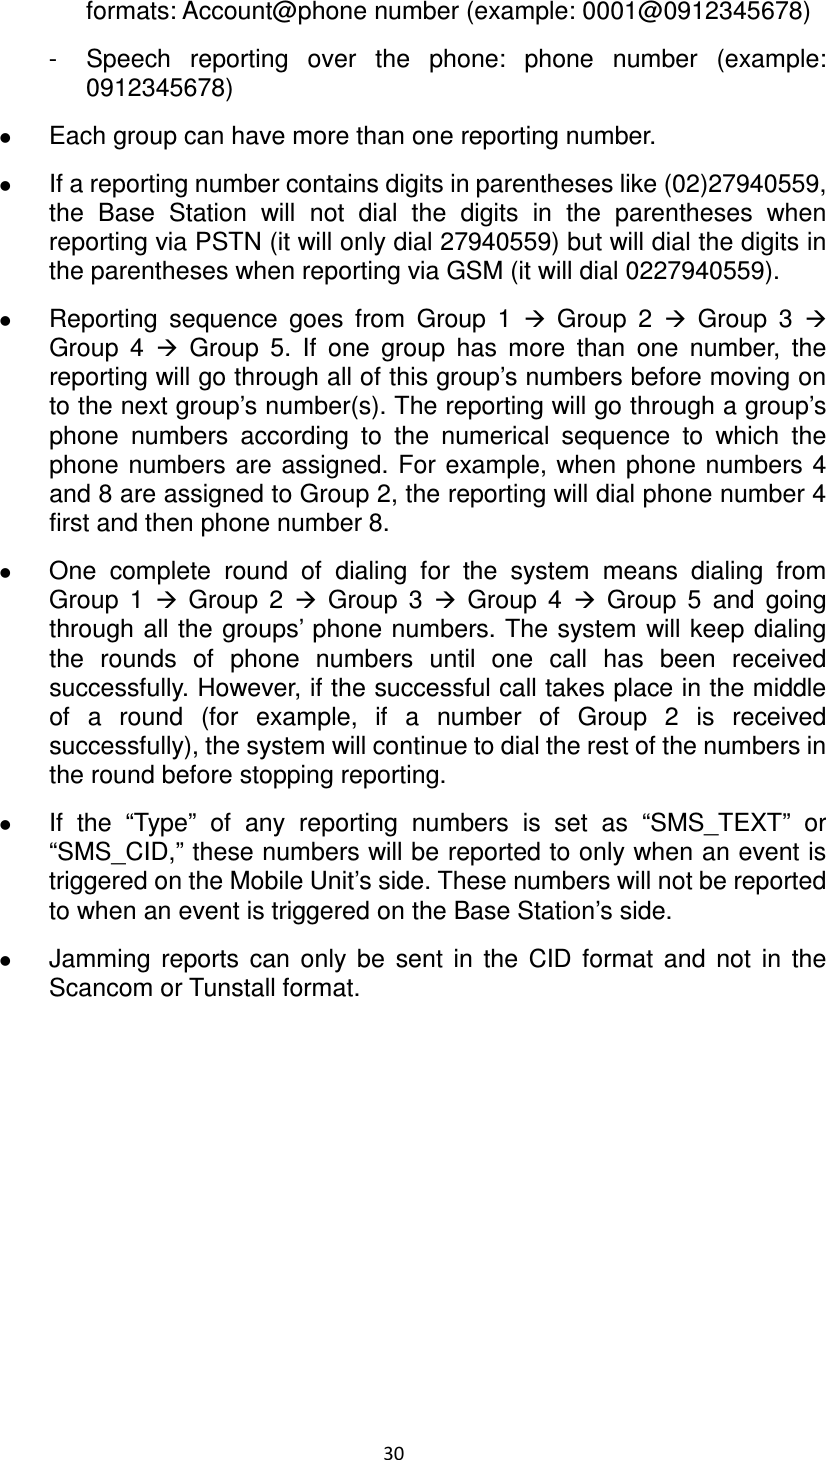 30  formats: Account@phone number (example: 0001@0912345678) -  Speech  reporting  over  the  phone:  phone  number  (example: 0912345678)  Each group can have more than one reporting number.    If a reporting number contains digits in parentheses like (02)27940559, the  Base  Station  will  not  dial  the  digits  in  the  parentheses  when reporting via PSTN (it will only dial 27940559) but will dial the digits in the parentheses when reporting via GSM (it will dial 0227940559).  Reporting  sequence  goes  from  Group  1    Group  2    Group  3   Group  4    Group  5.  If  one  group  has  more  than  one  number,  the reporting will go through all of this group’s numbers before moving on to the next group’s number(s). The reporting will go through a group’s phone  numbers  according  to  the  numerical  sequence  to  which  the phone  numbers are assigned. For example, when phone numbers 4 and 8 are assigned to Group 2, the reporting will dial phone number 4 first and then phone number 8.  One  complete  round  of  dialing  for  the  system  means  dialing  from Group  1    Group  2    Group  3    Group  4    Group  5  and  going through all the groups’ phone numbers. The system will keep dialing the  rounds  of  phone  numbers  until  one  call  has  been  received successfully. However, if the successful call takes place in the middle of  a  round  (for  example,  if  a  number  of  Group  2  is  received successfully), the system will continue to dial the rest of the numbers in the round before stopping reporting.      If  the  “Type”  of  any  reporting  numbers  is  set  as  “SMS_TEXT”  or “SMS_CID,” these numbers will be reported to only when an event is triggered on the Mobile Unit’s side. These numbers will not be reported to when an event is triggered on the Base Station’s side.    Jamming  reports  can  only  be  sent  in  the  CID  format  and  not  in  the Scancom or Tunstall format.                     